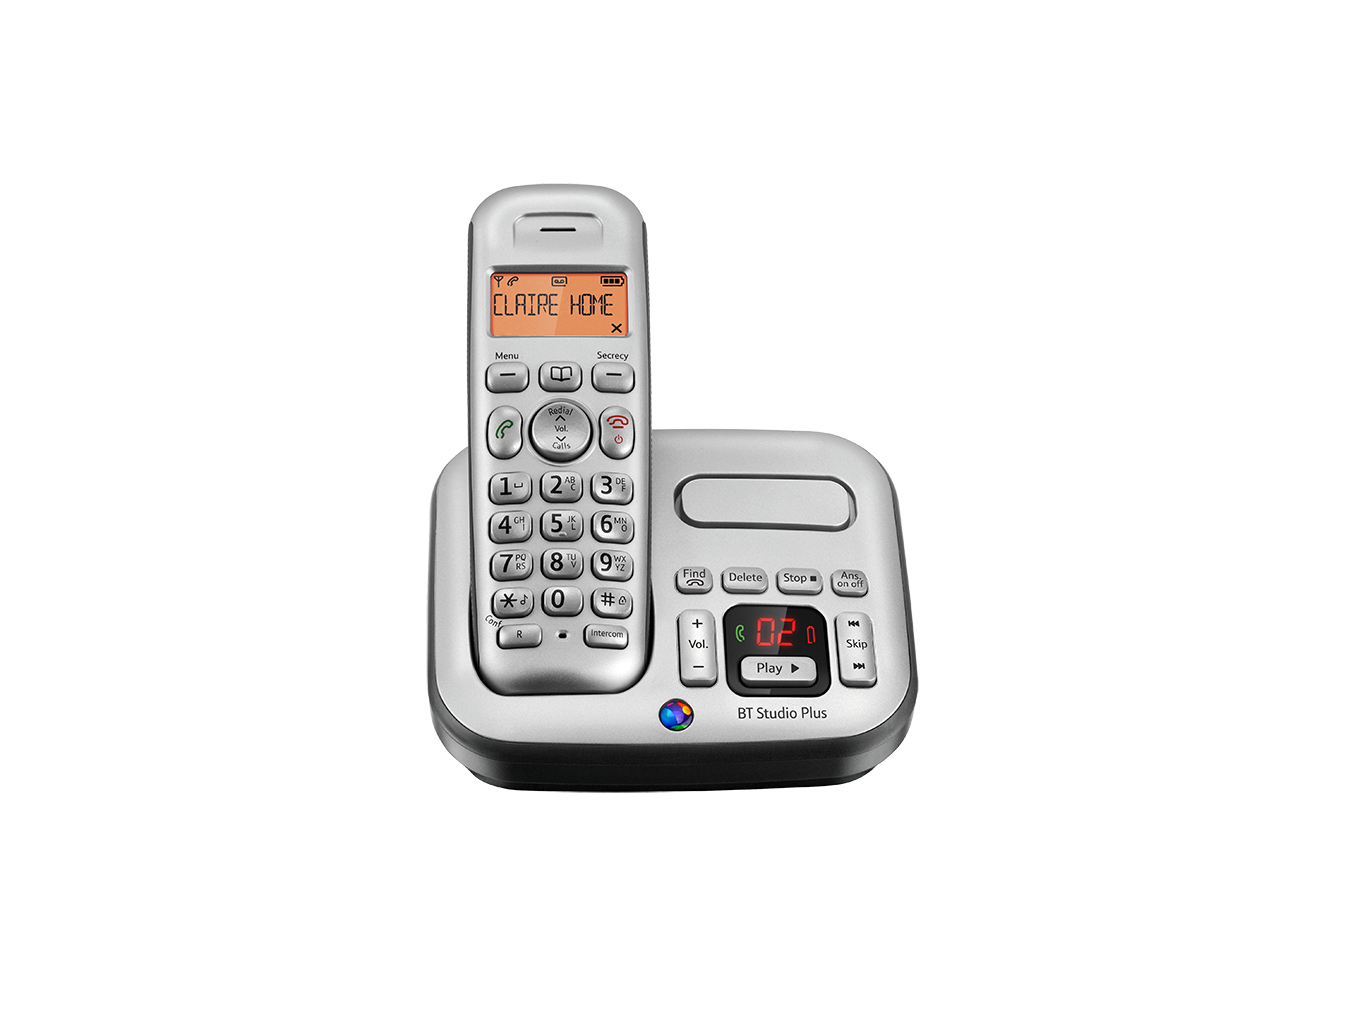 BT Hudson Plus 1500 Single DECT Cordless Telephone with Answer Machine